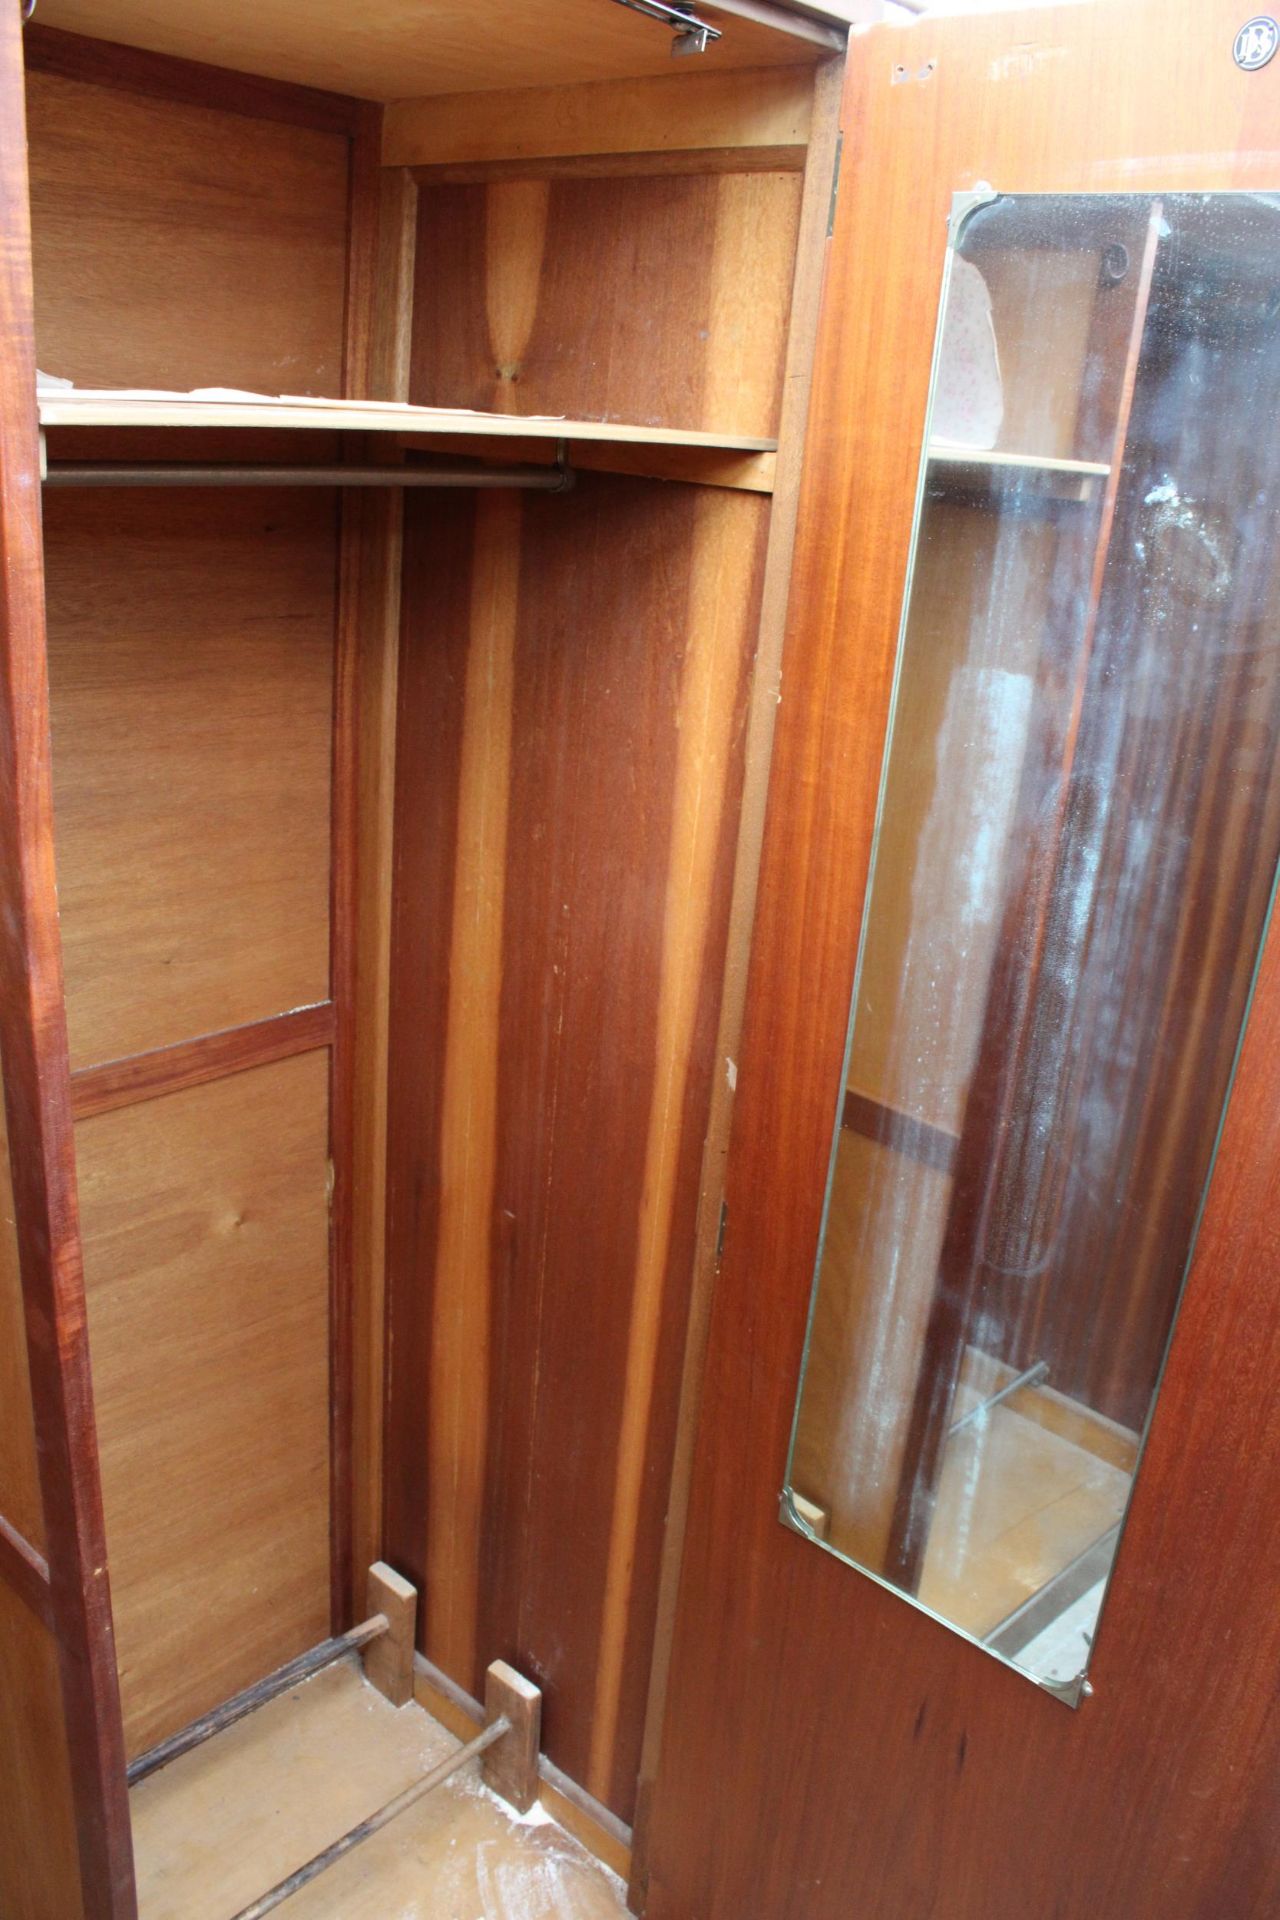 A MID 20TH CENTURY D.B.S. FURNITURE WALNUT TWO DOOR WARDROBE, DRESSING TABLE, 4'6" BEDHEAD AND FOOT, - Image 4 of 7